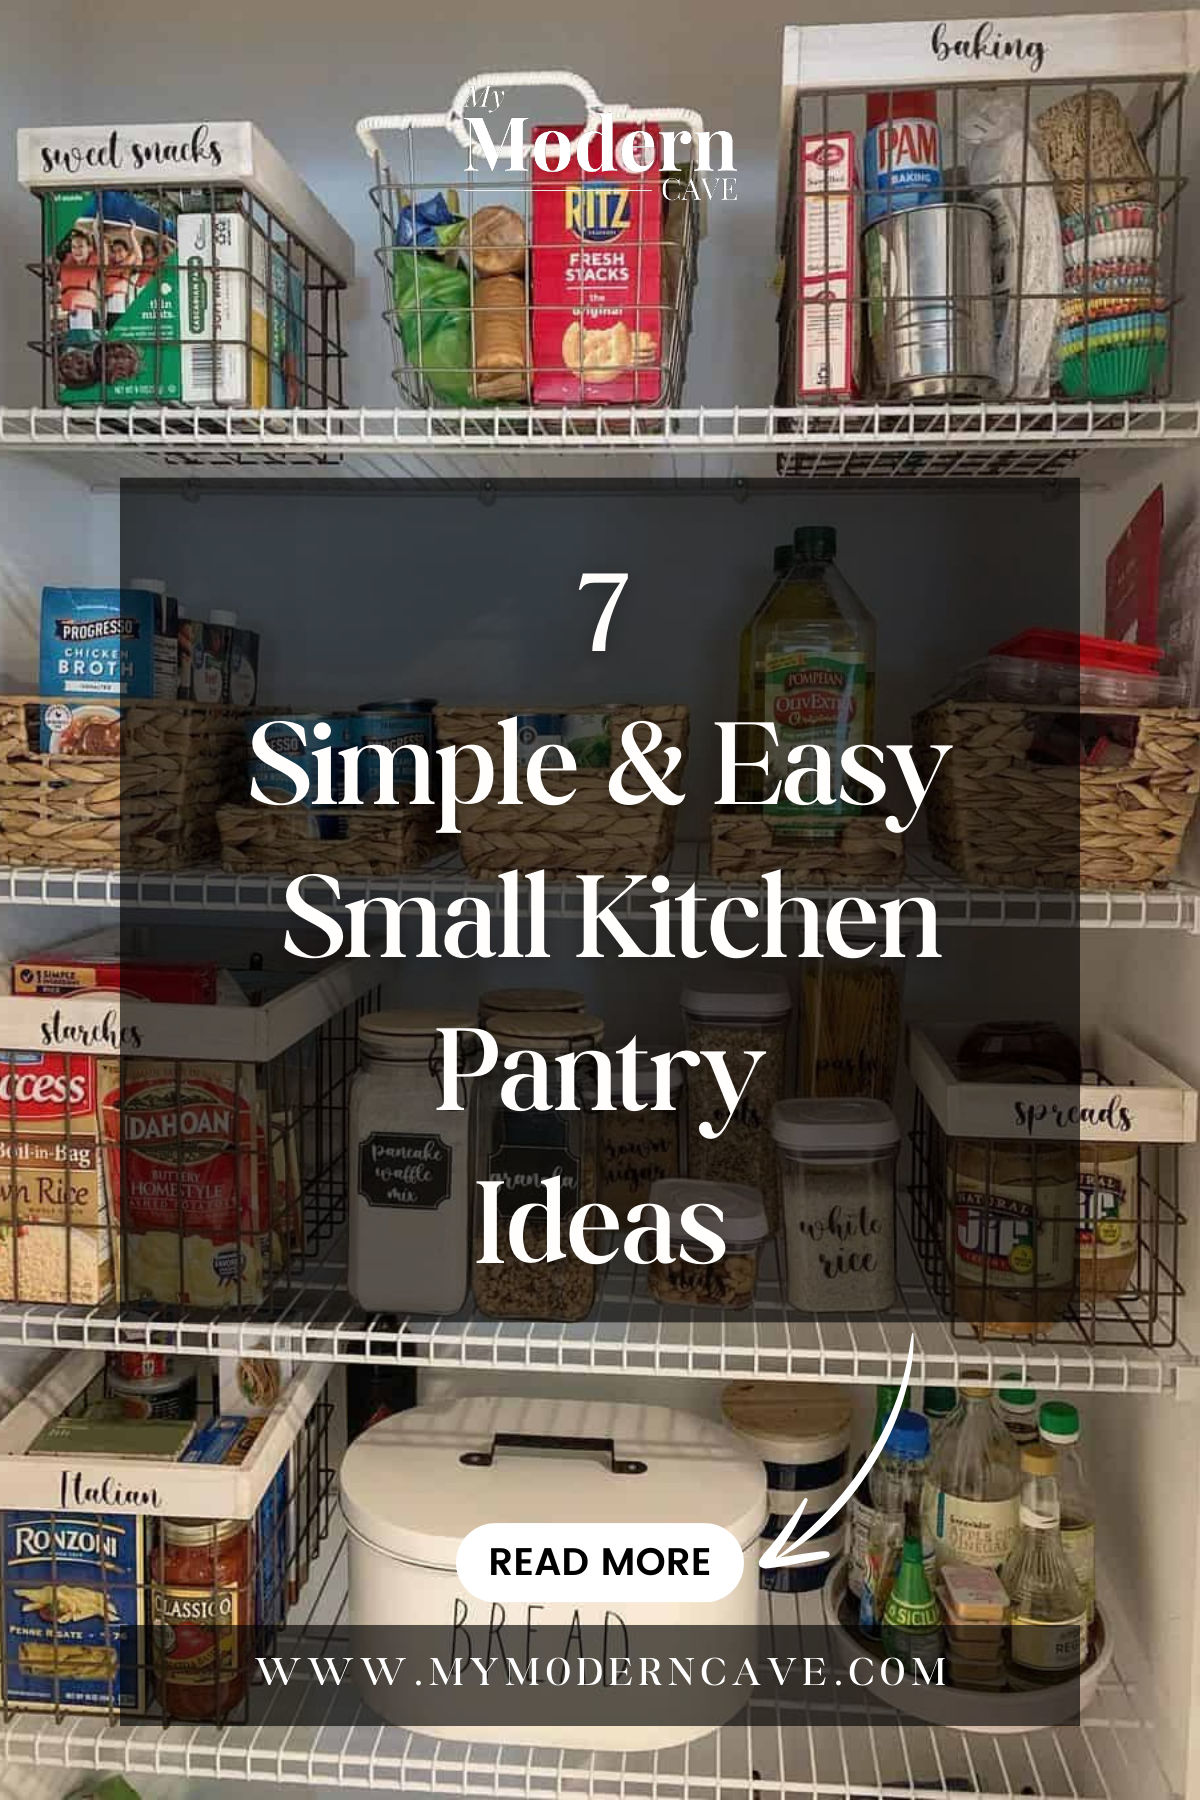 Small Kitchen Pantry Ideas Infographic